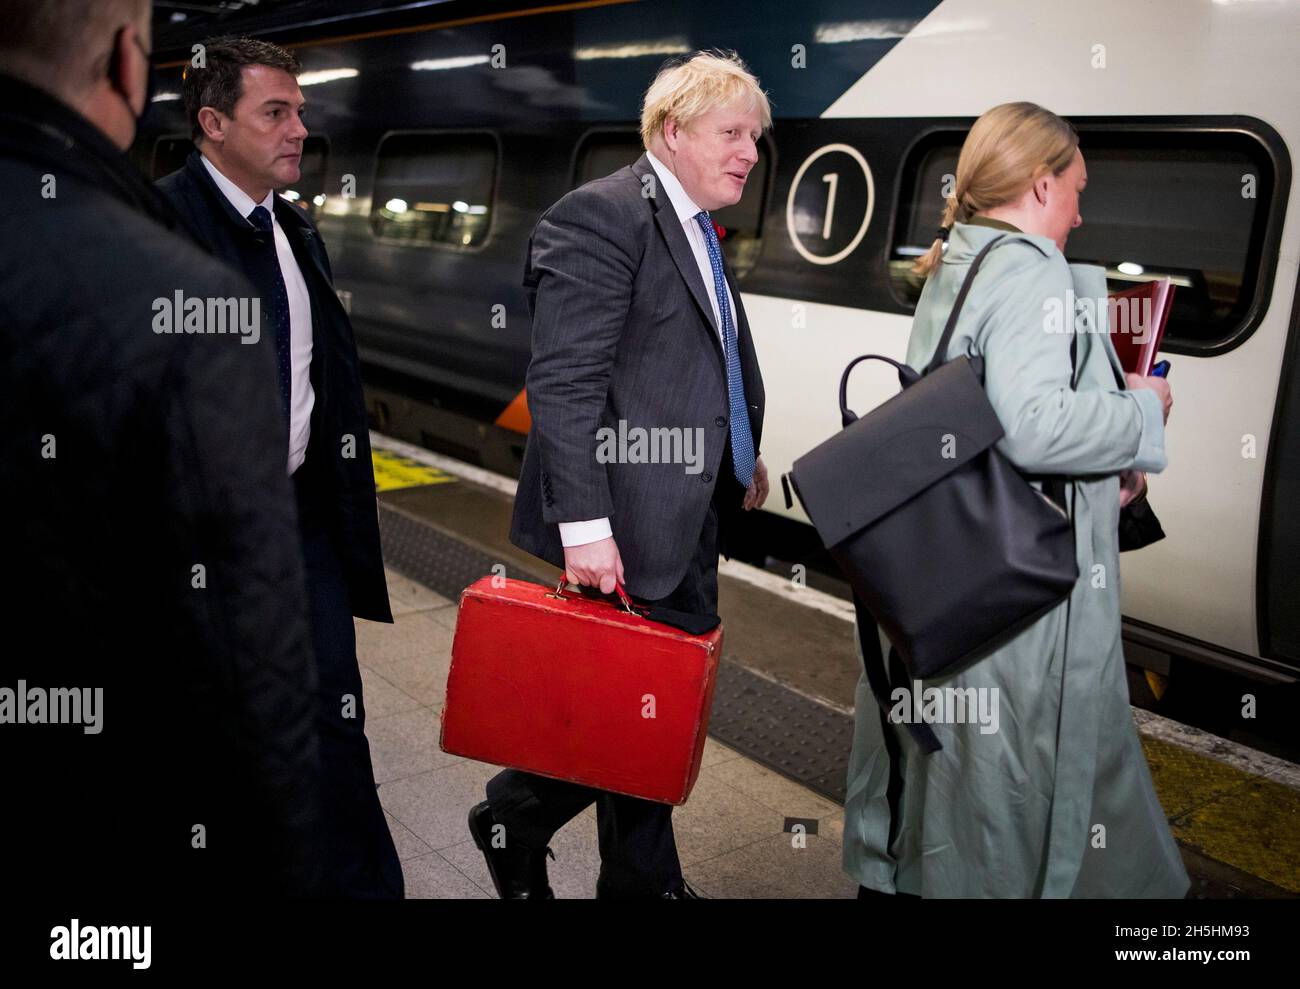 London, UK. 10th Nov, 2021. British Prime Minister BORIS JOHNSON arrives at Euston Station to travel by train to Glasgow for an update on negotiations at the COP26 Climate Conference. Photo credit: Ben Cawthra/Sipa USA **NO UK SALES** Credit: Sipa USA/Alamy Live News Stock Photo